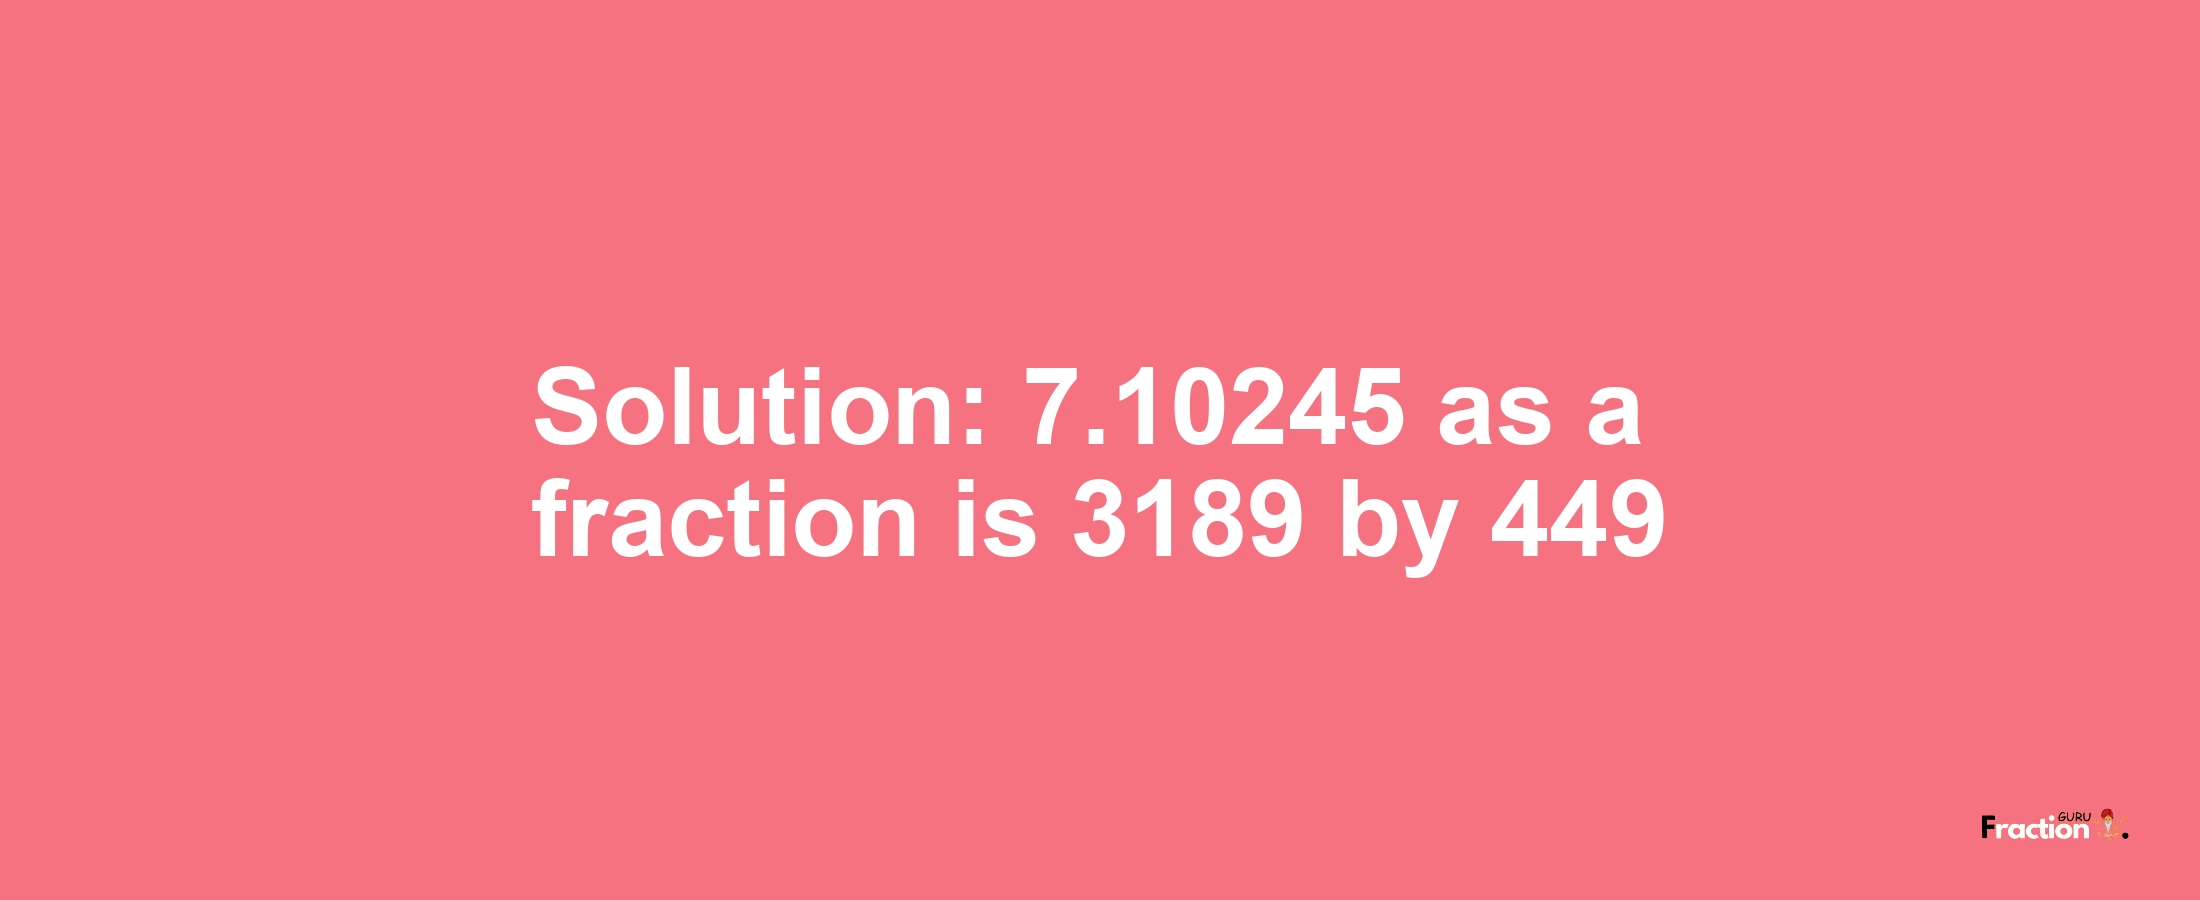 Solution:7.10245 as a fraction is 3189/449